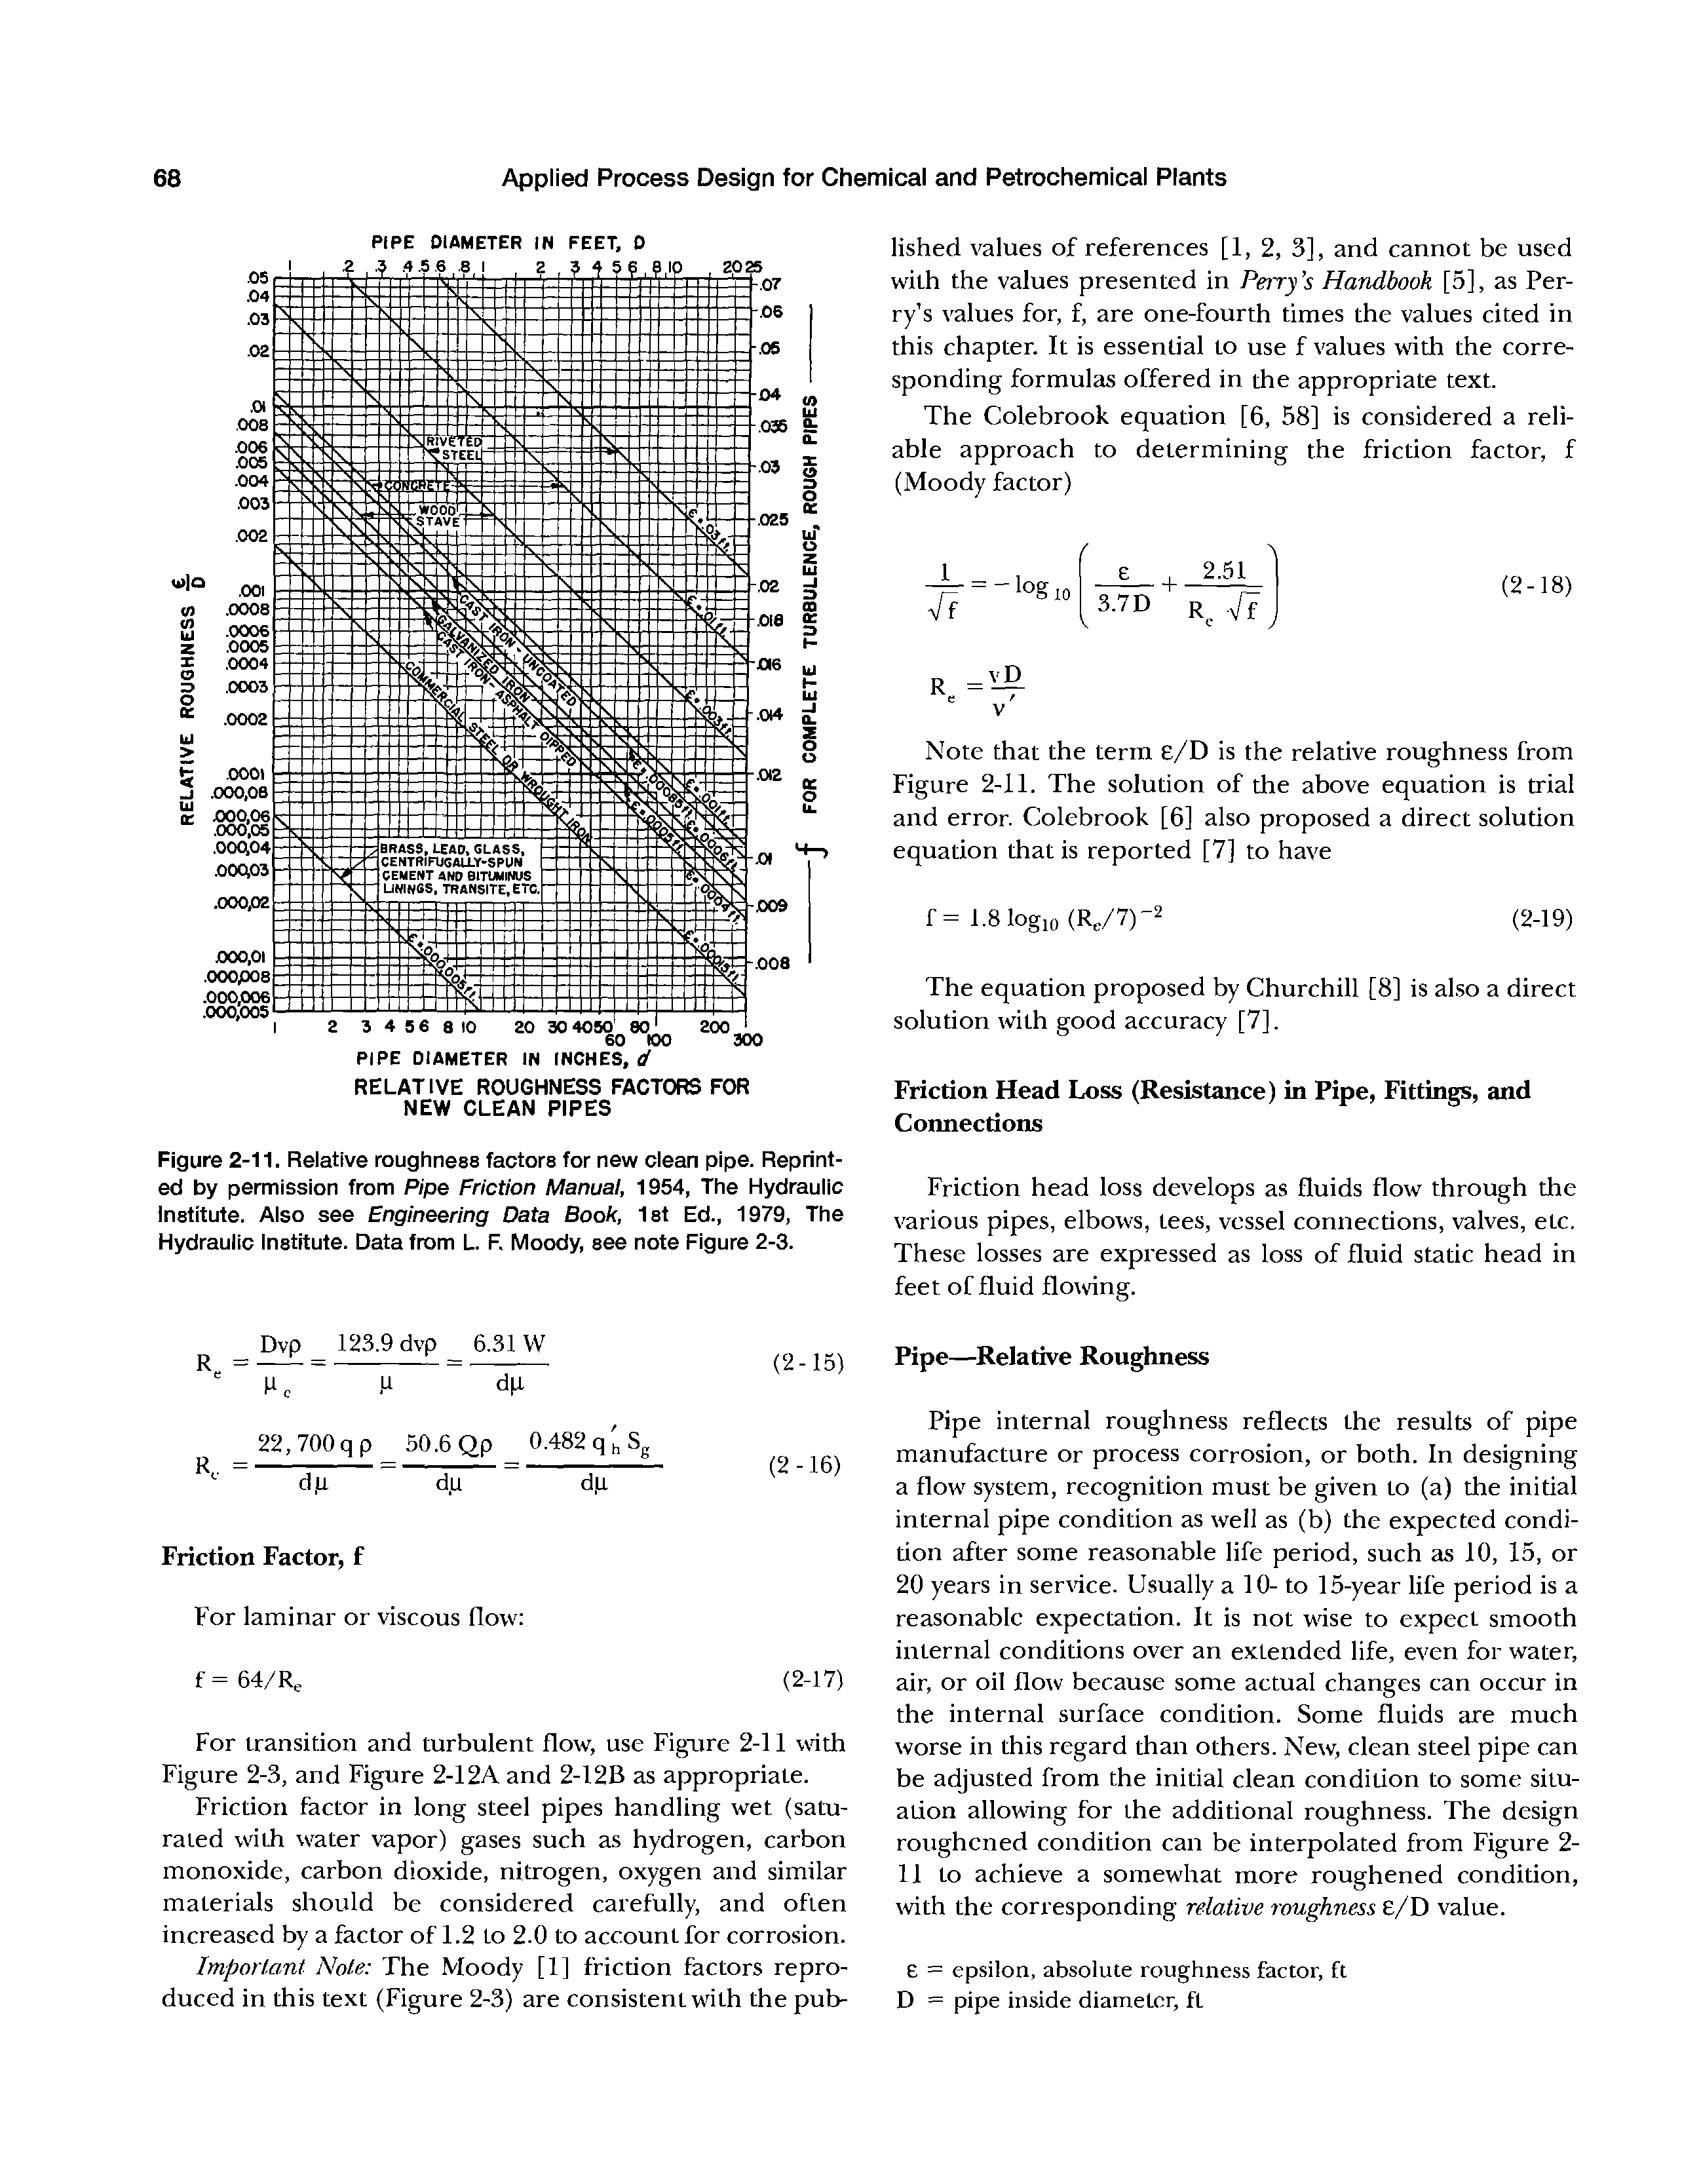 Figure 2-11. Relative roughness factors for new clean pipe. Reprinted by permission from Pipe Friction Manual, 1954, The Hydraulic Institute. Also see Engineering Data Book, 1st Ed., 1979, The Hydraulic Institute. Data from L. F. Moody, see note Figure 2-3.